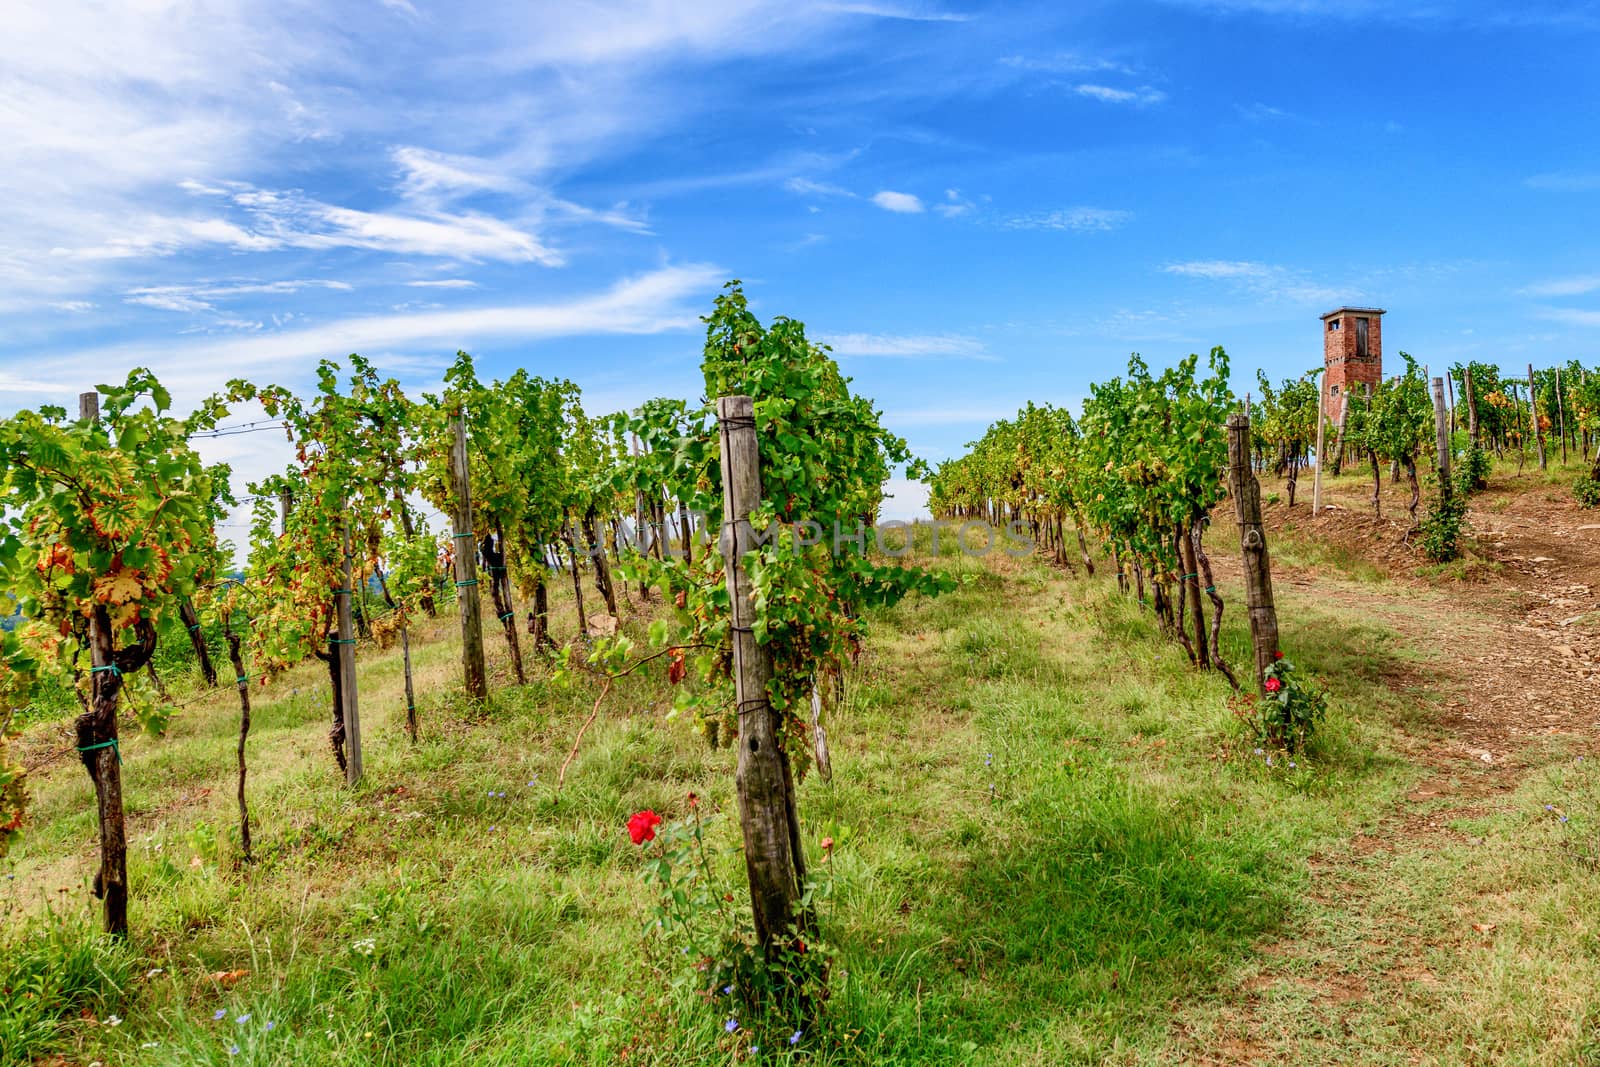 Vineyards with rows of grapevine in Gorska Brda, Slovenia, old military watch tower in background by asafaric